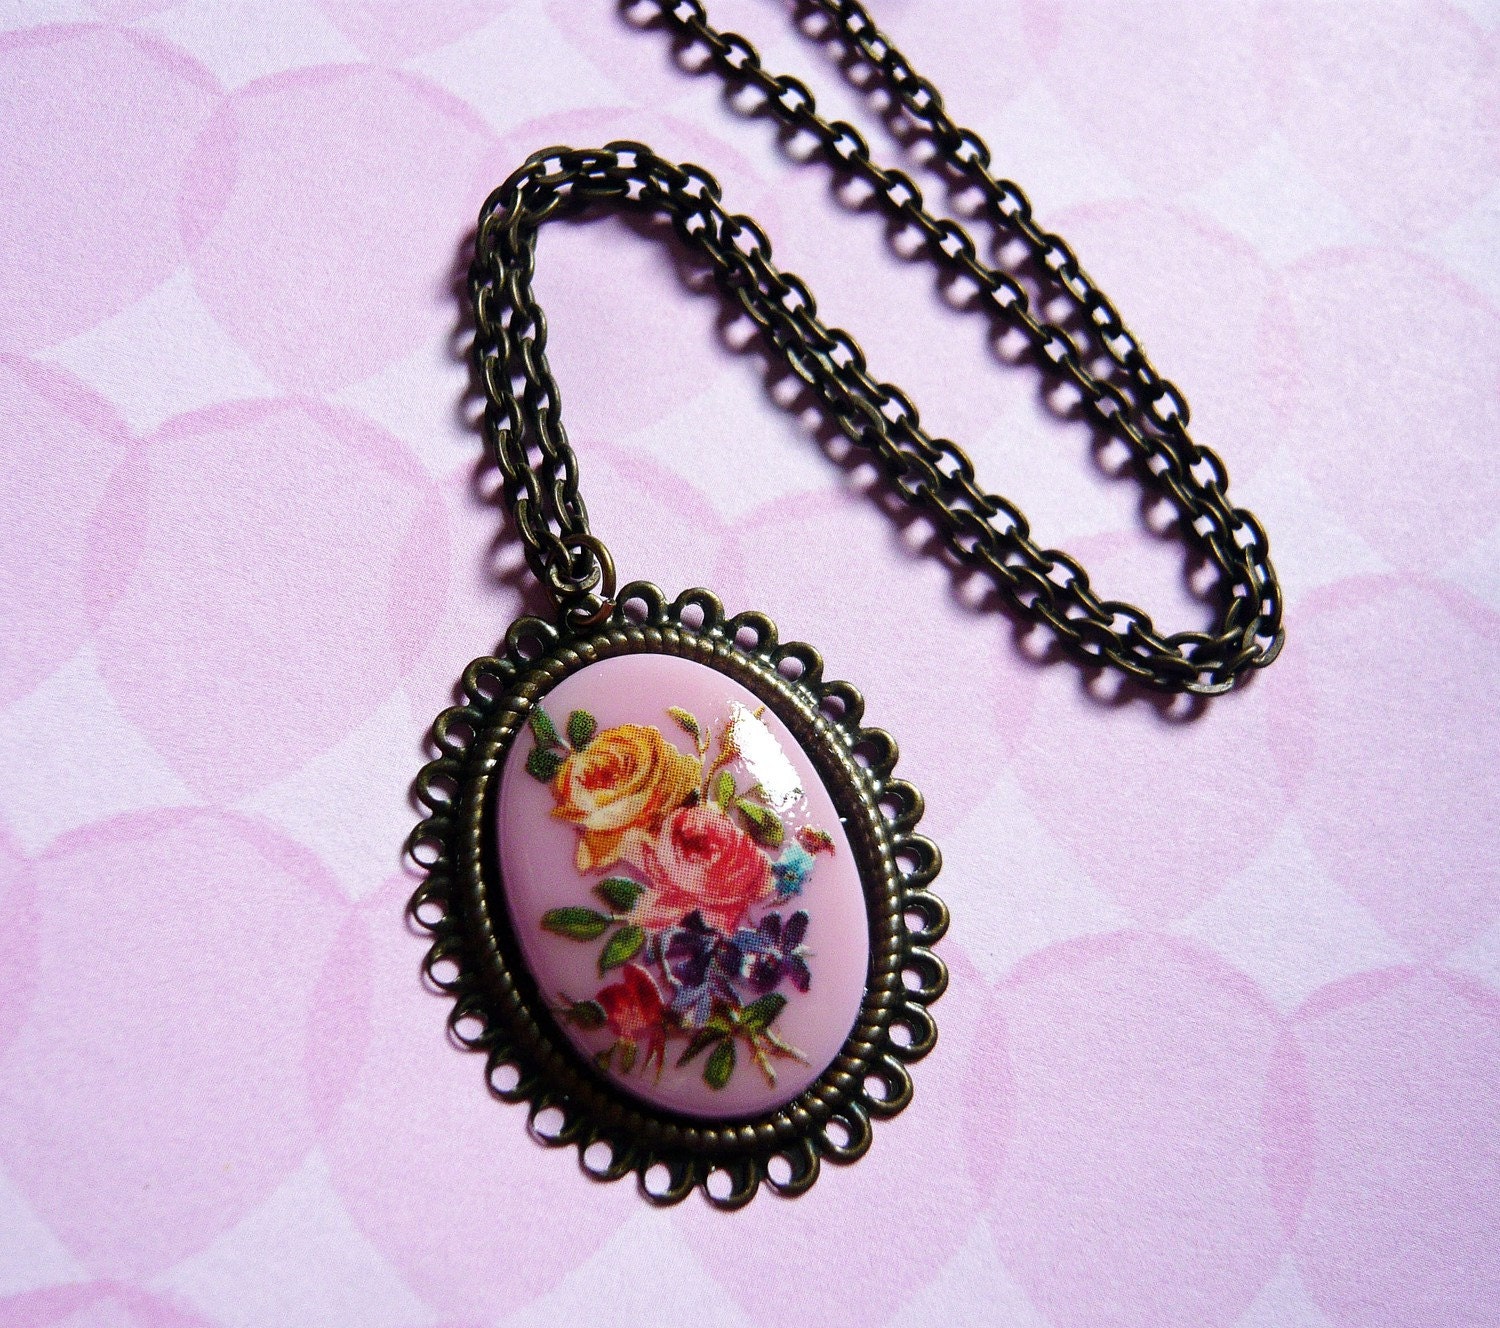 Lilac Floral Cameo Necklace by MaruMaru on Etsy from etsycom